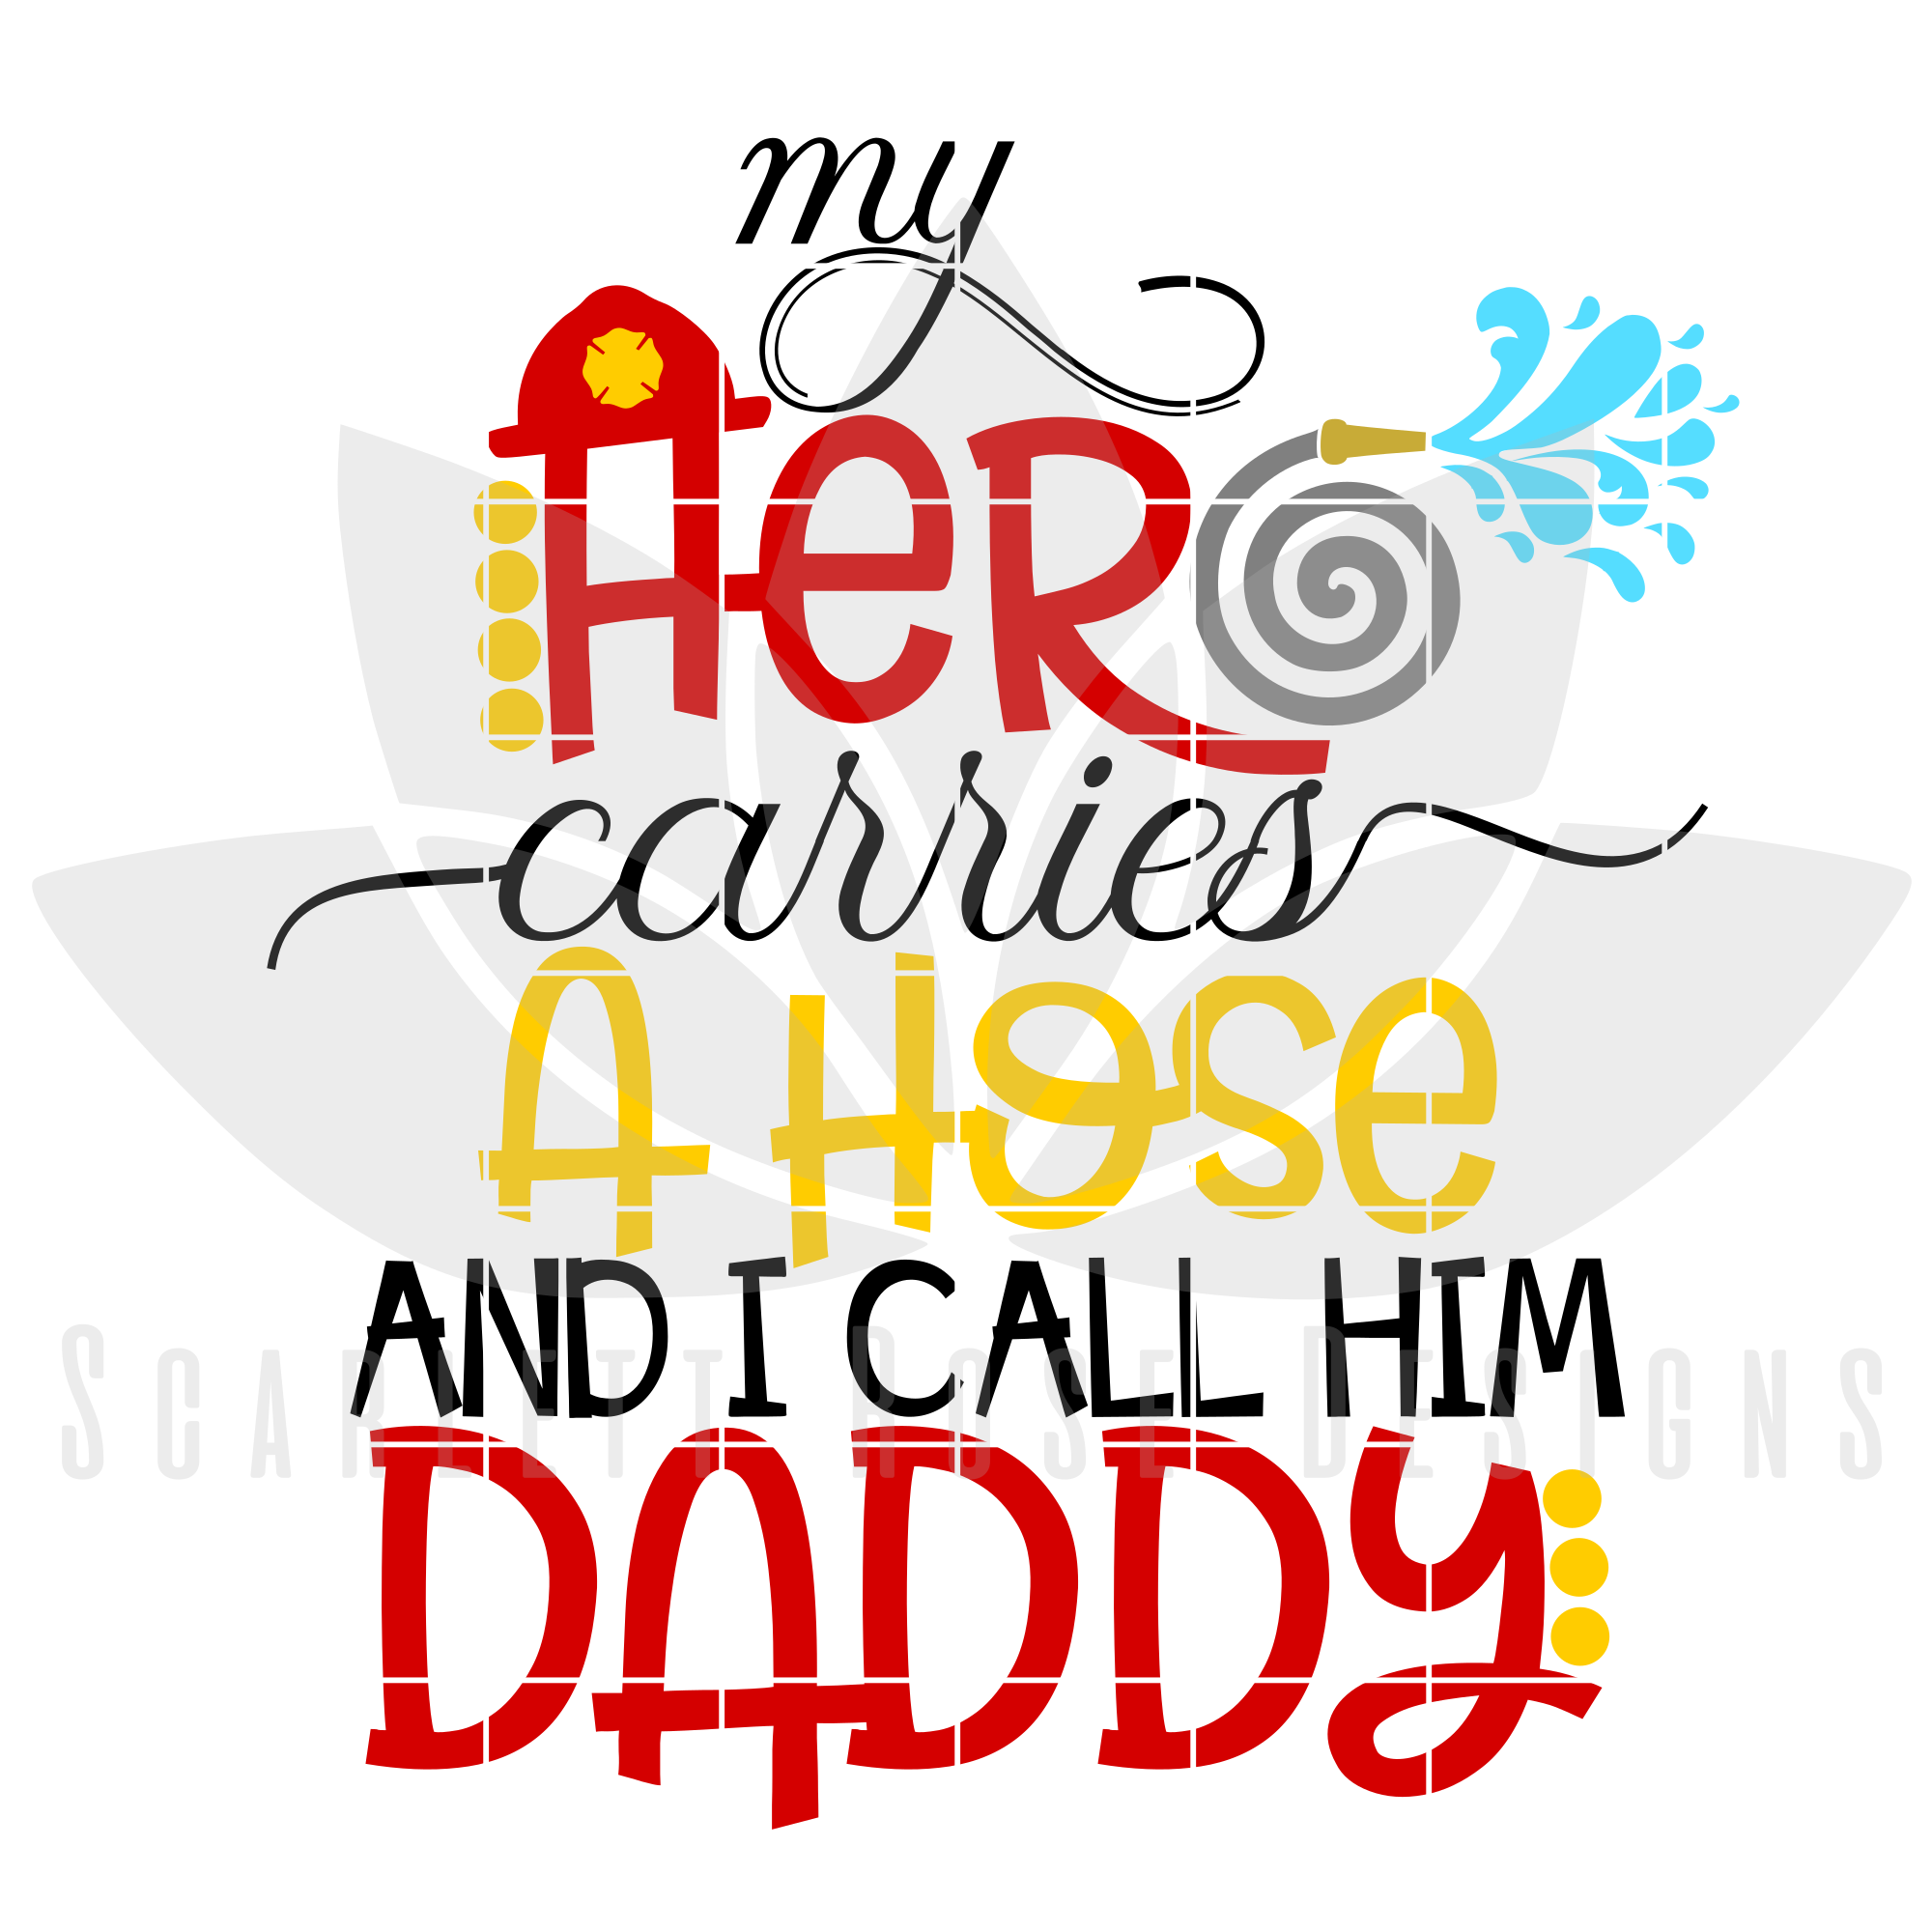 Download My Hero Carries A Hose And I Call Him Daddy SVG, Father's ...